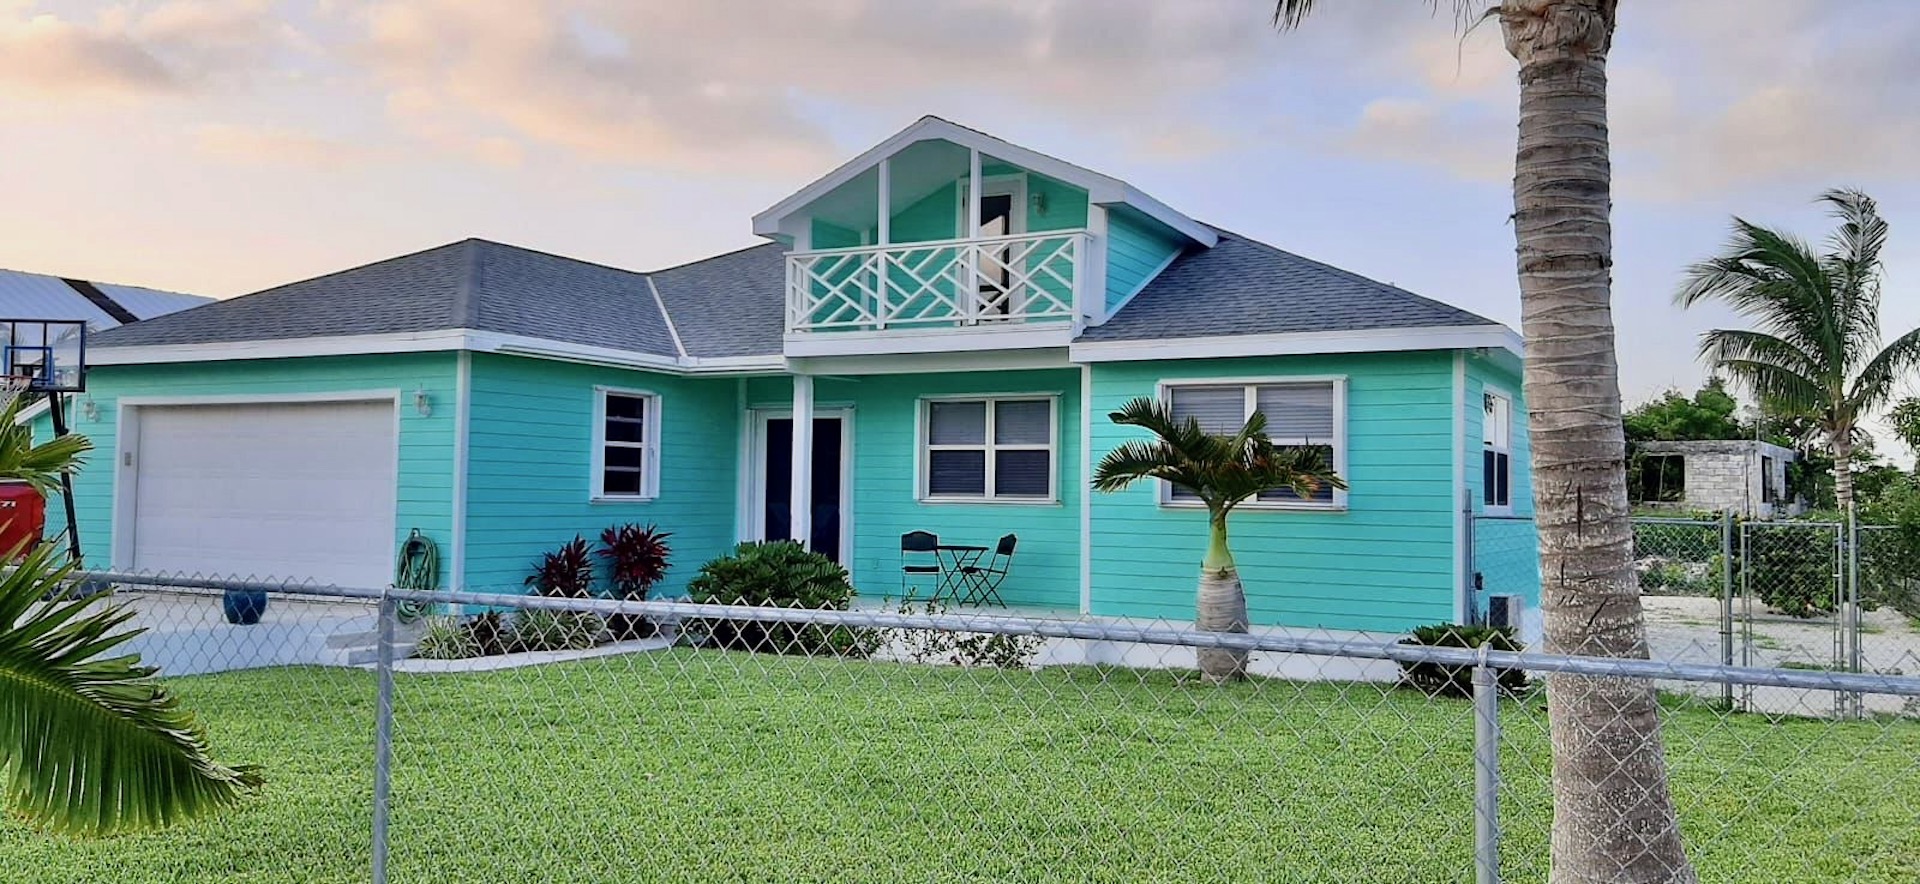 turn-key-home-for-sale-coopers-town-north-abaco-real-estate-1